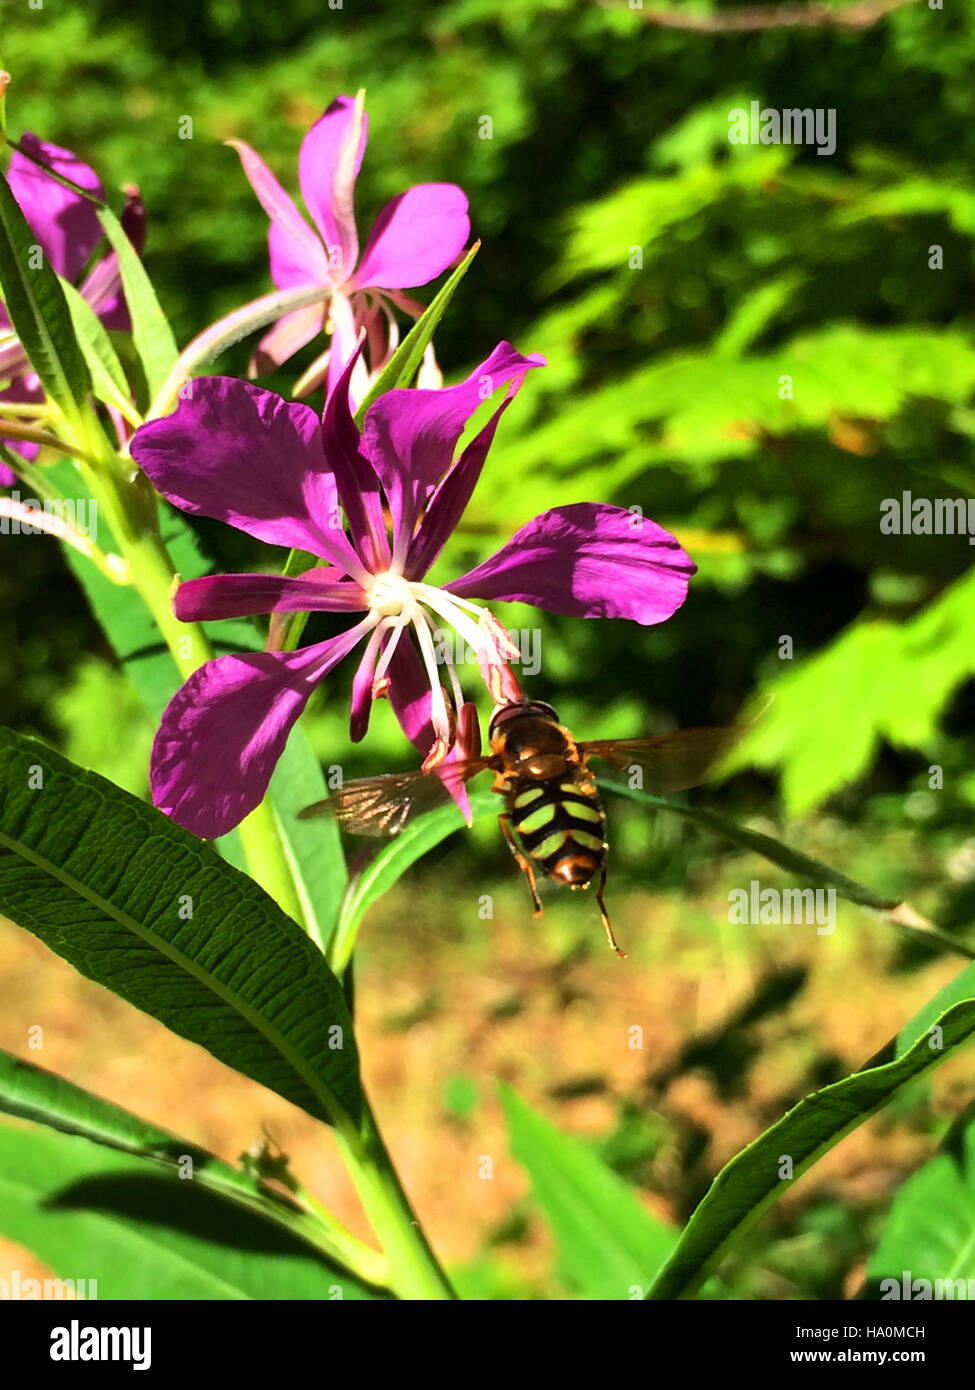 olympicnps 22554449648 fireweed flowers insects Sol Duc cbubar 2015 Stock Photo